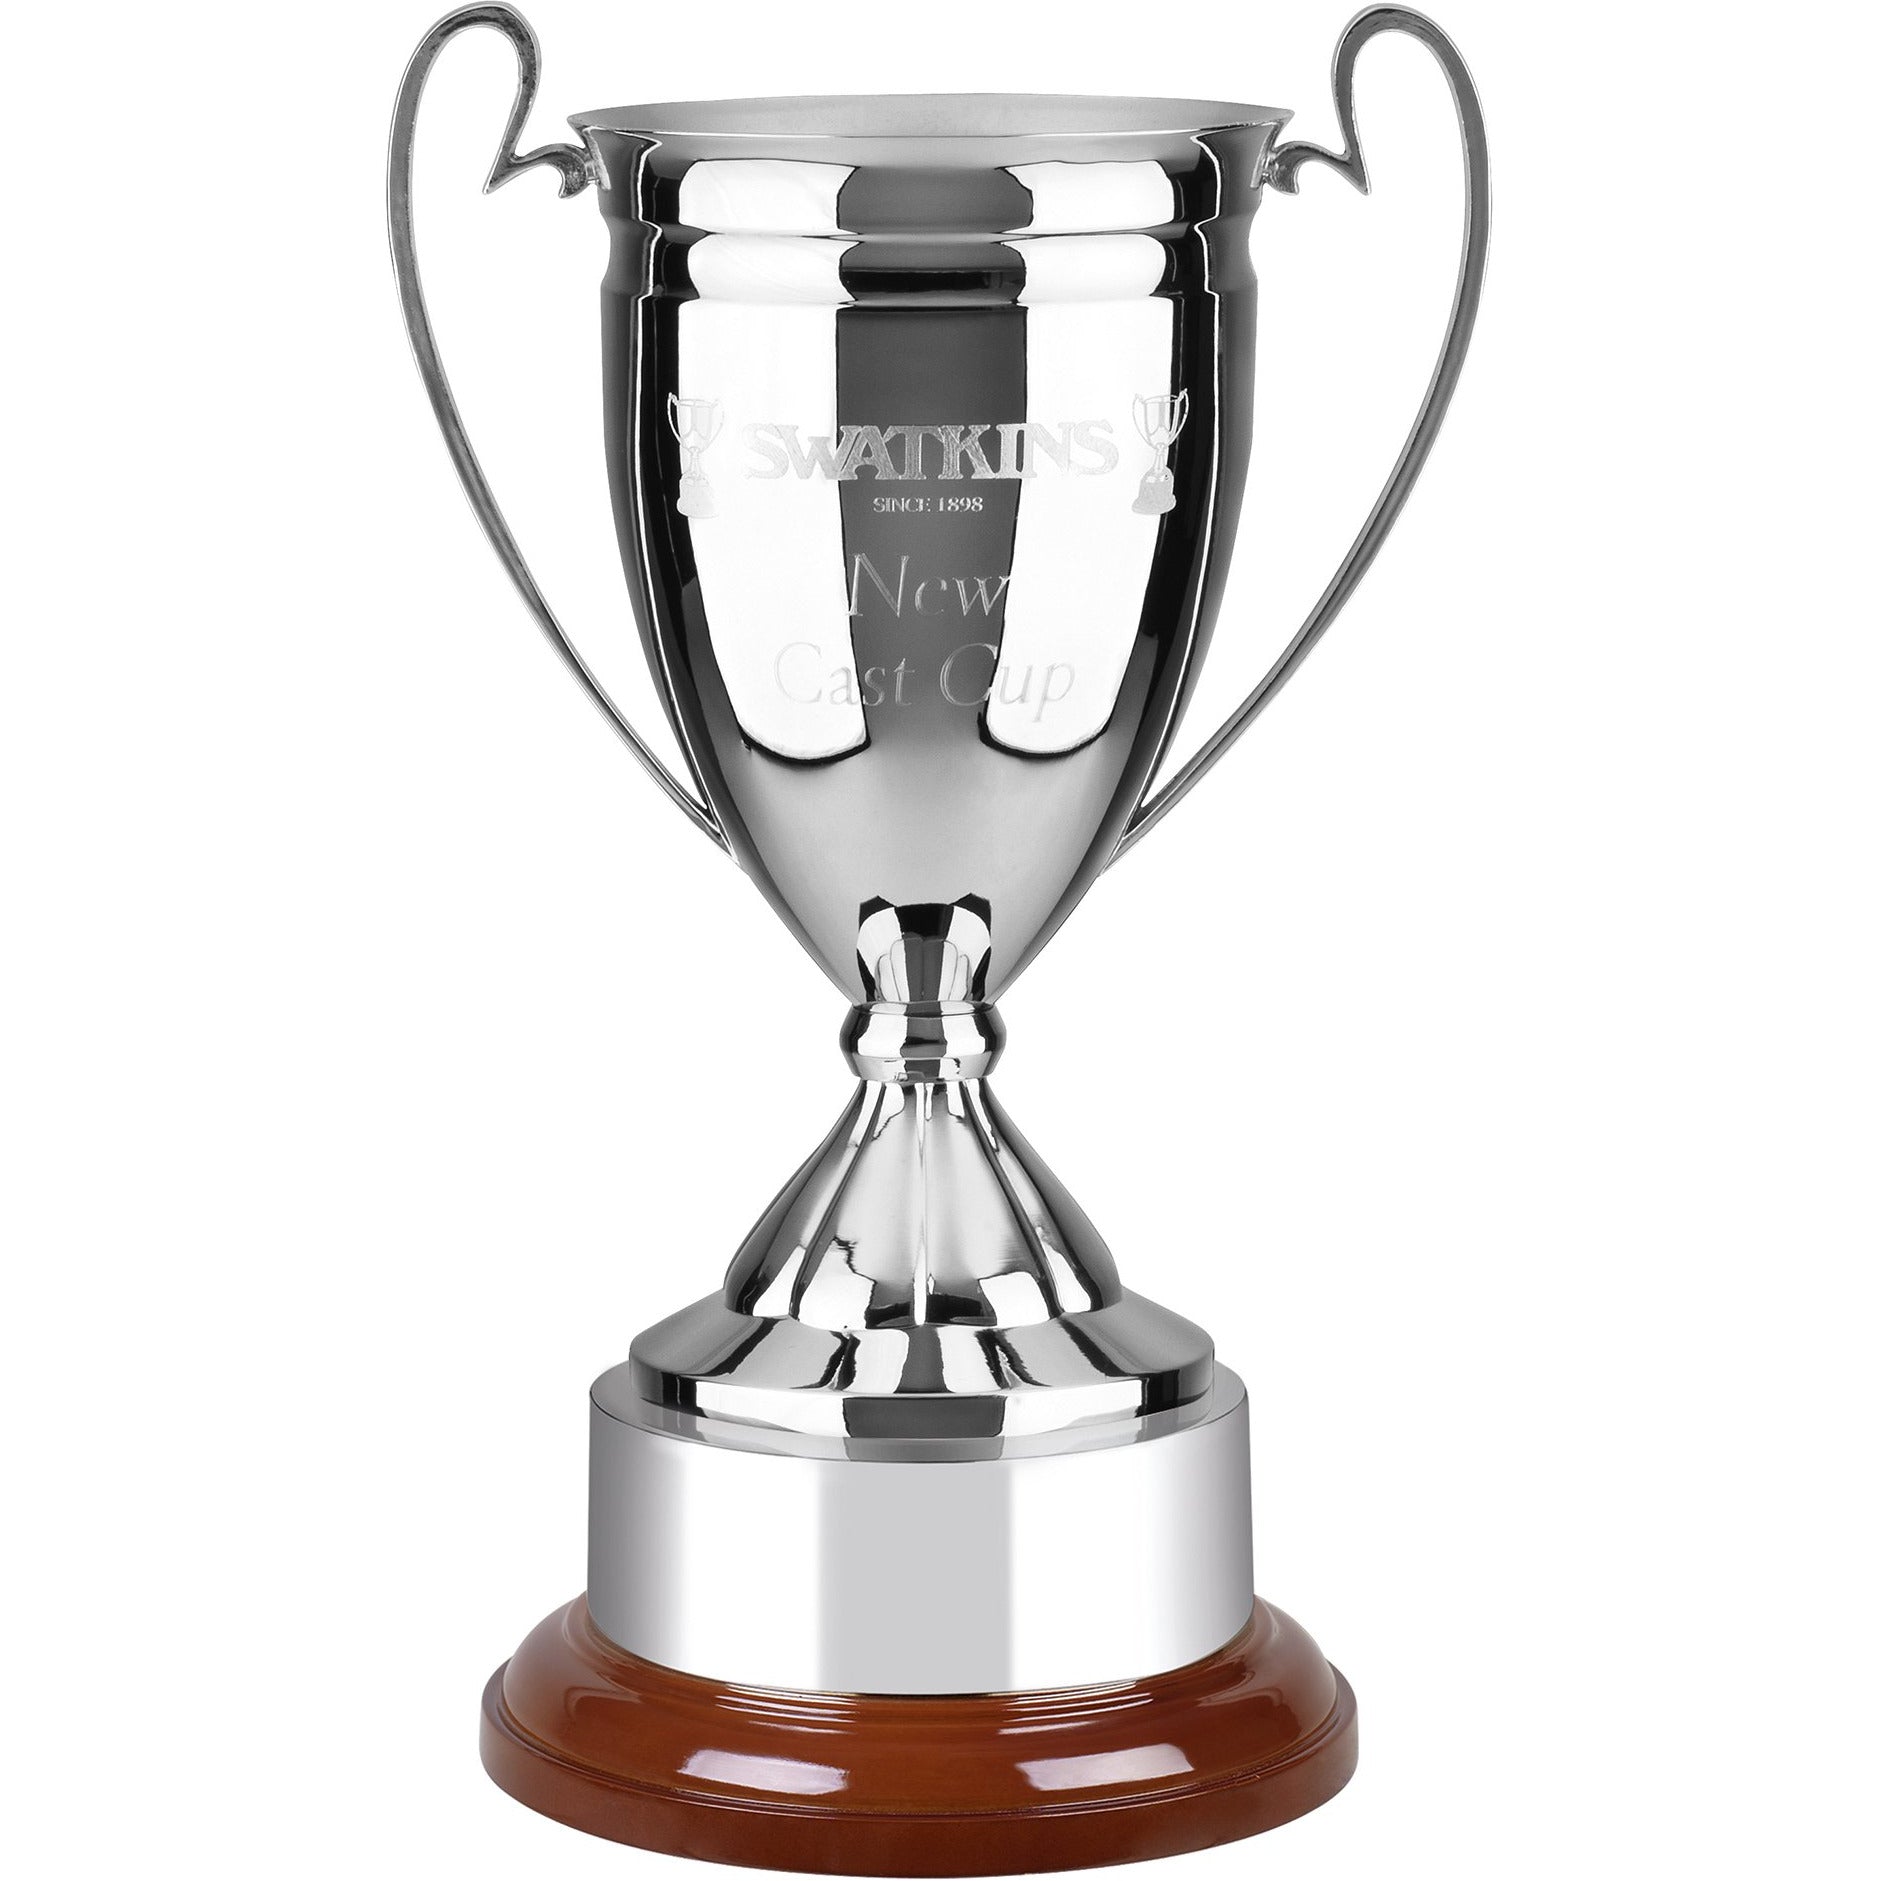 Champions Endurance Trophy Cup on Rosewood Base